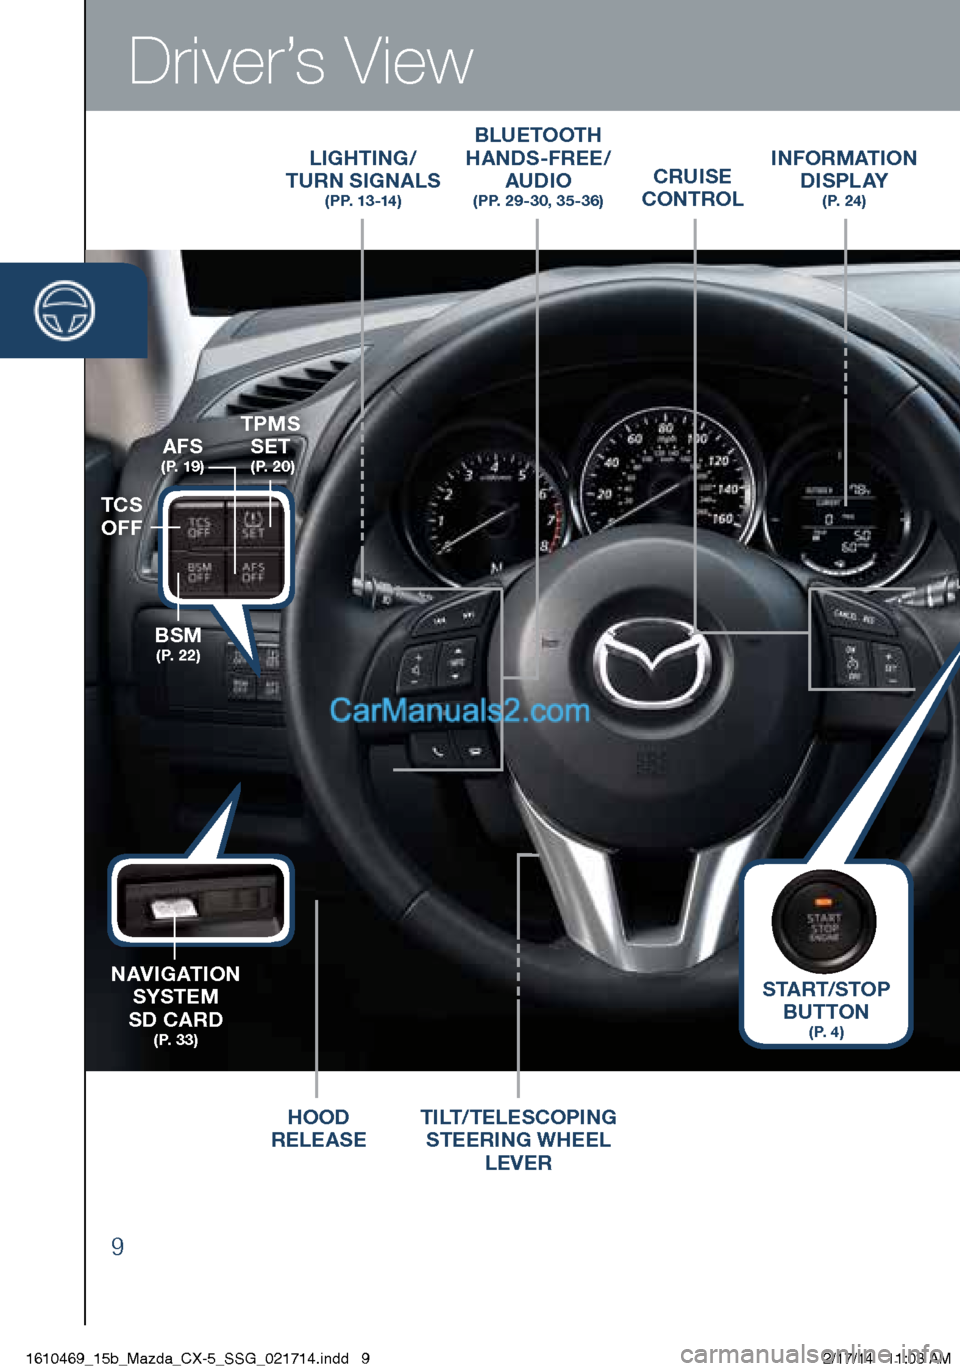 MAZDA MODEL CX-5 2015  Smart Start Guide (in English) Driver’s View
LIGHTING/  
TURN SIGNALS  
( P P.  1 3 -14 )
BLUETOOTH  
HANDS-FREE/  
AUDIO  
 (PP. 29-30, 35 -36)
INFORMATION 
D I S P L AY  
( P.  2 4 )
HOOD 
RELEASE TILT/TELESCOPING
 
STEERING WH